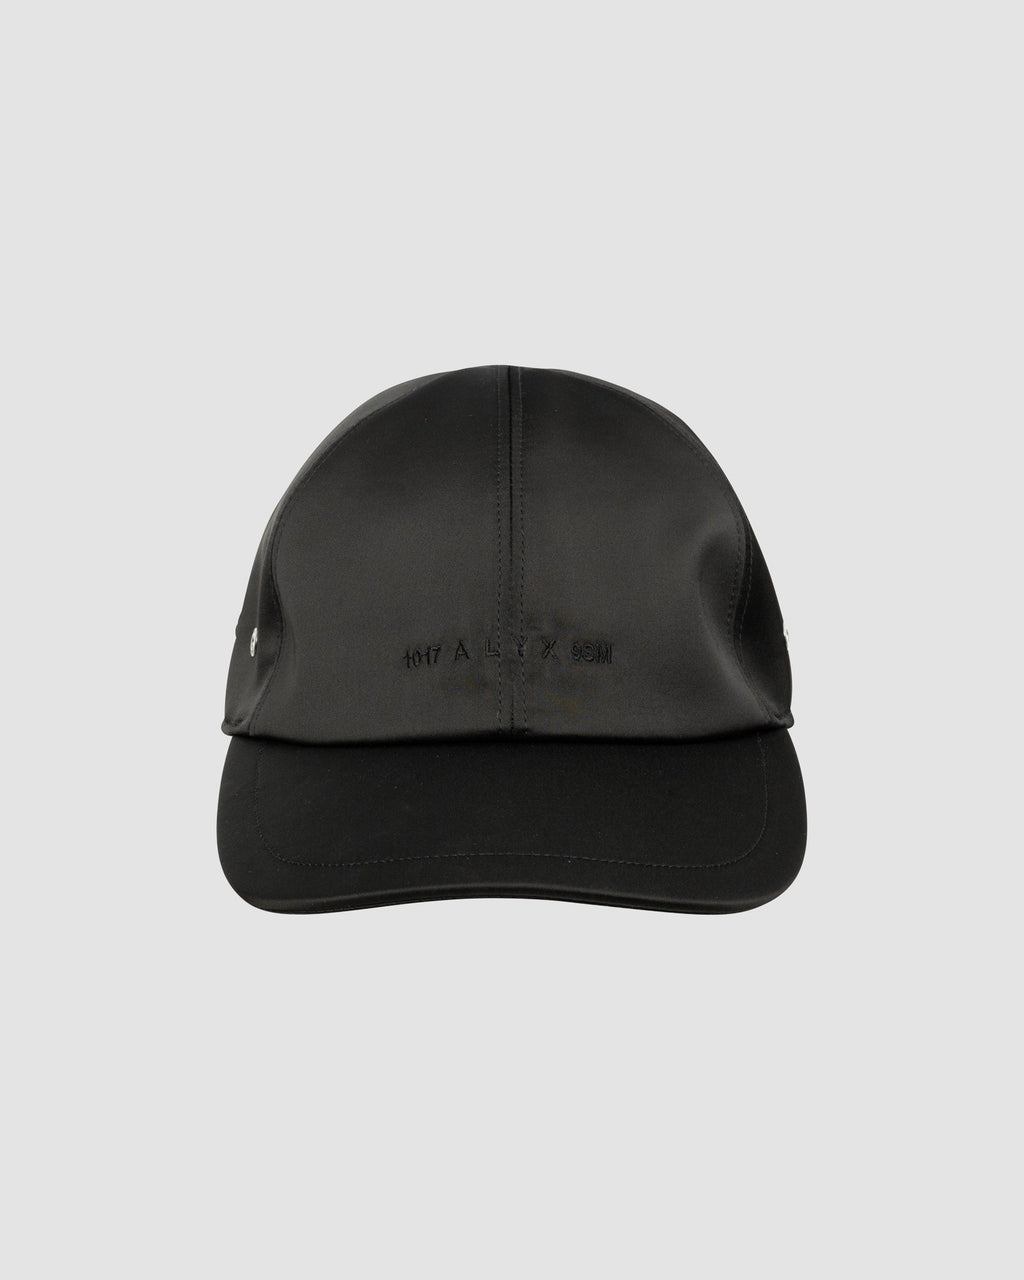 1017 ALYX 9SM | HATS | Explore the latest collection of 1017 ALYX 9SM